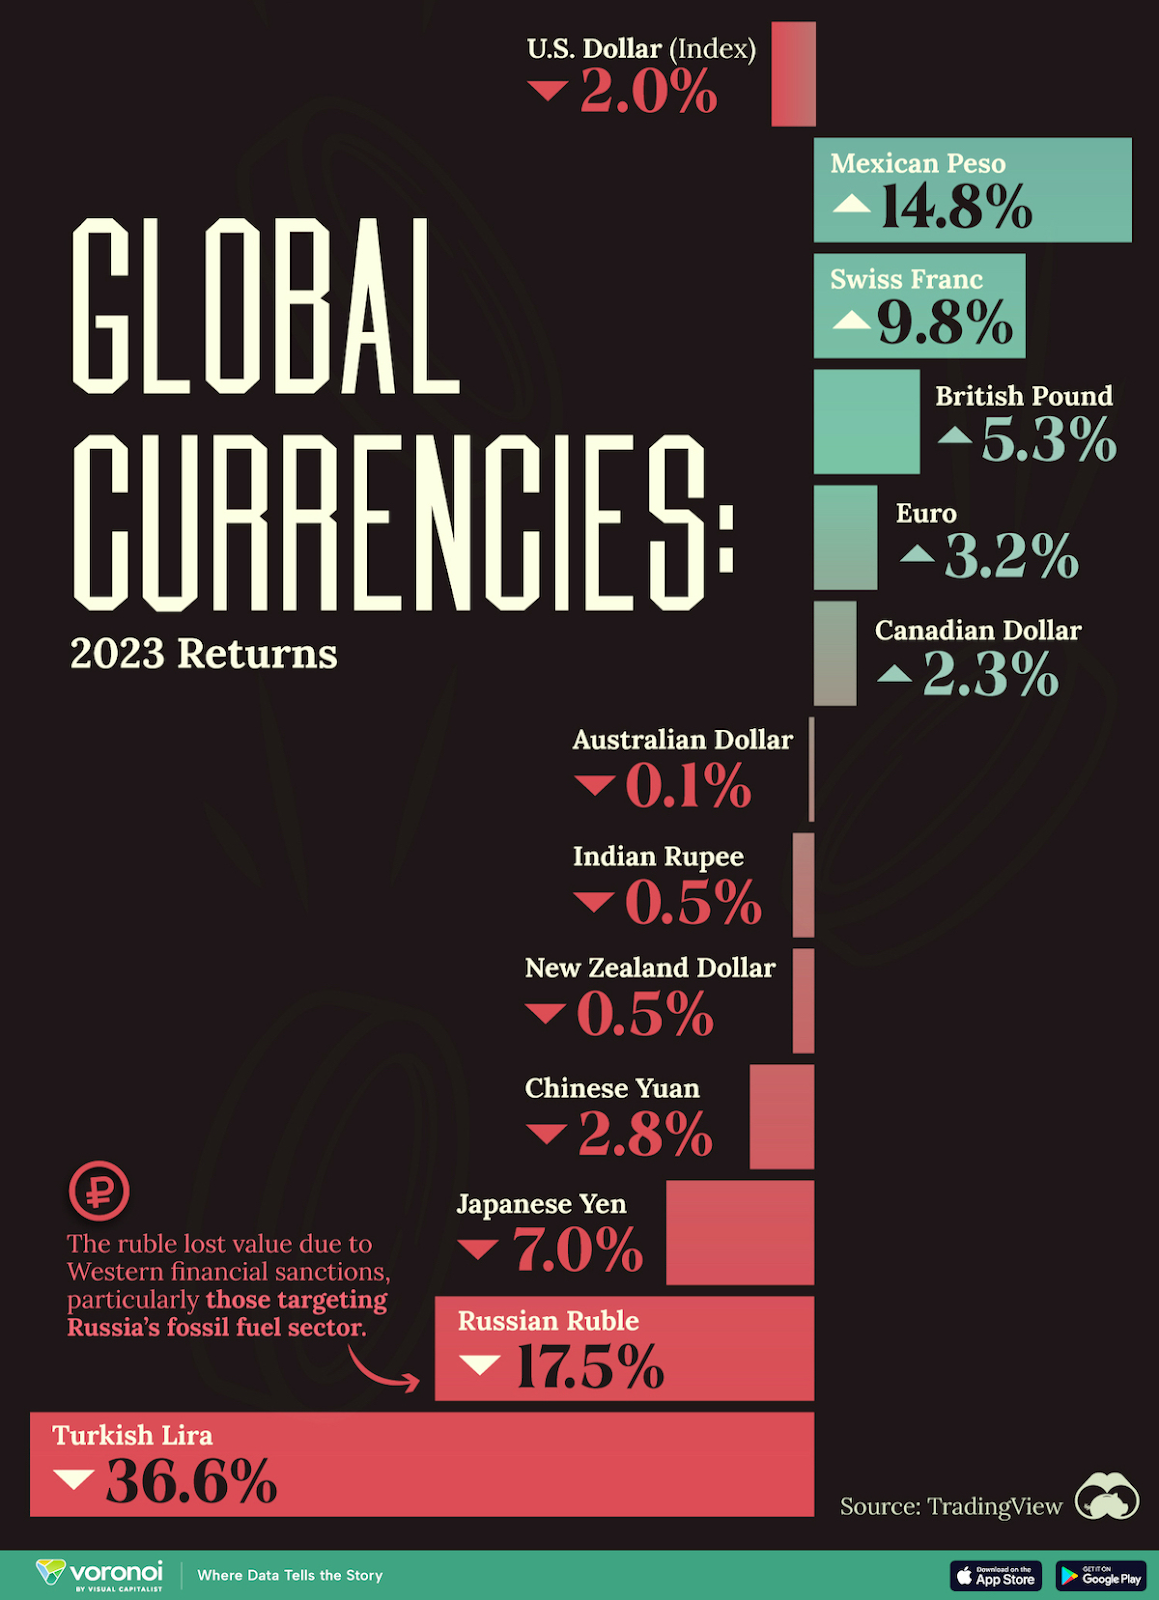 Global Currencies in 2023 Infographic